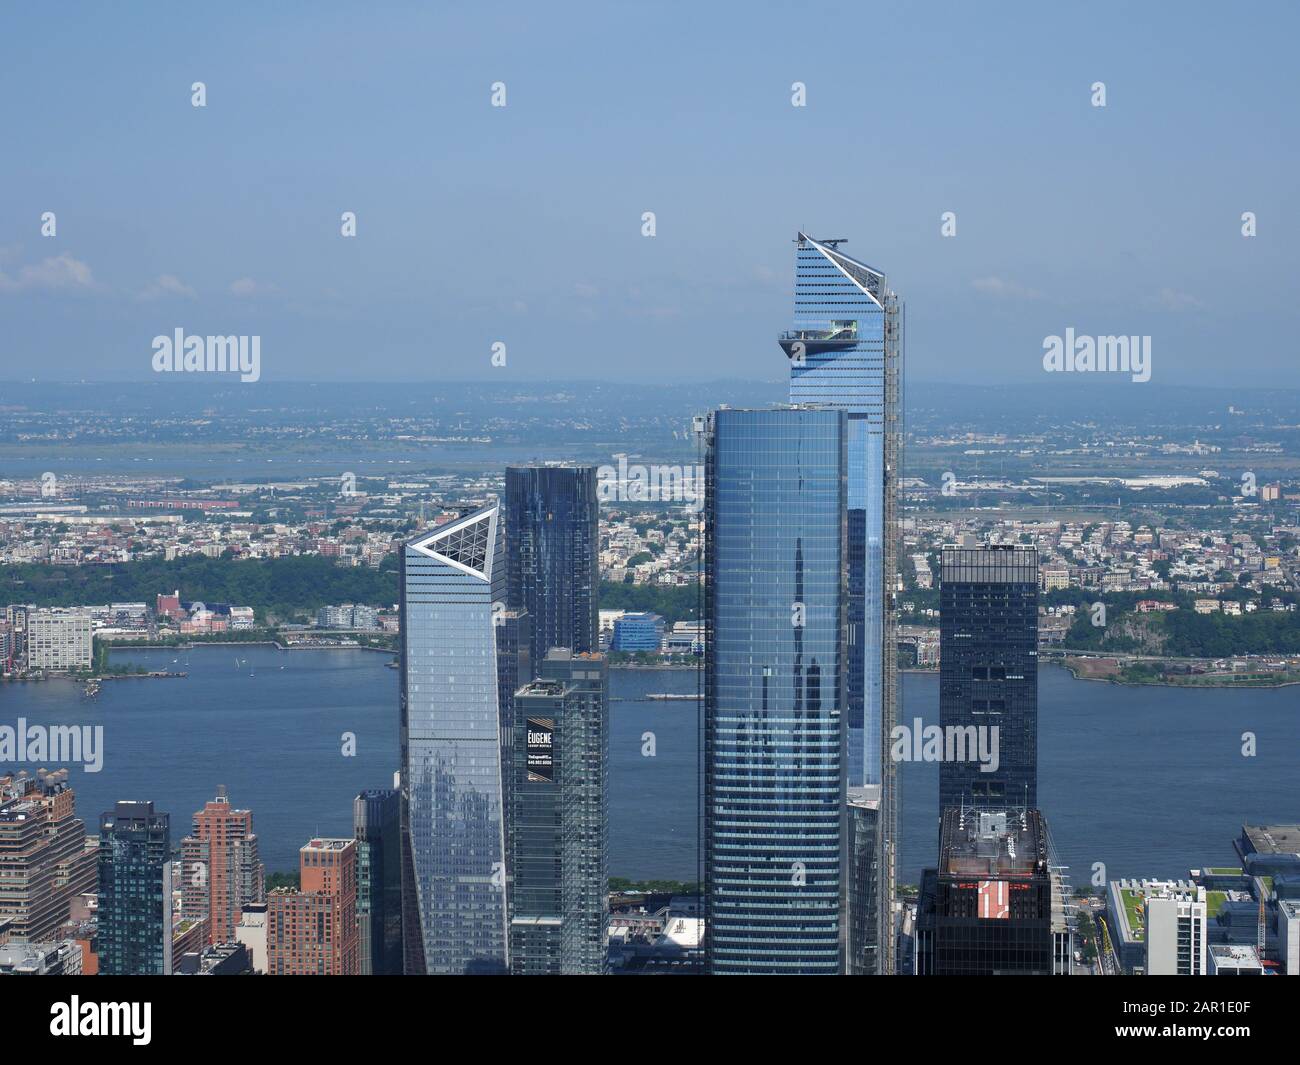 New York, USA - May 31, 2019: View of the '30 Hudson Yards' redevelopment project. Stock Photo